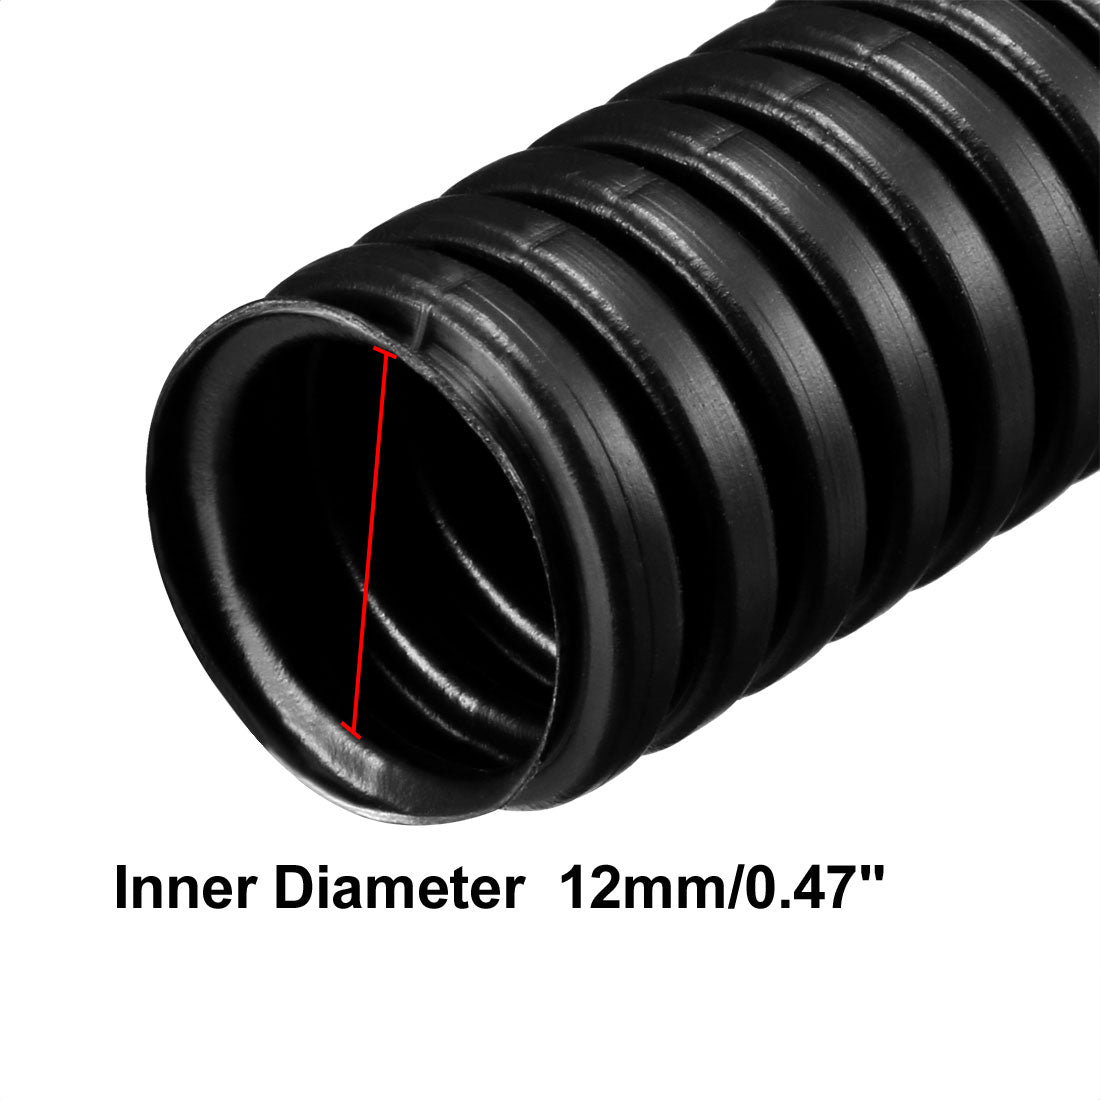 uxcell Uxcell 8.8 M 12 x 15.8 mm PP Flexible Corrugated Conduit Tube for Garden,Office Black